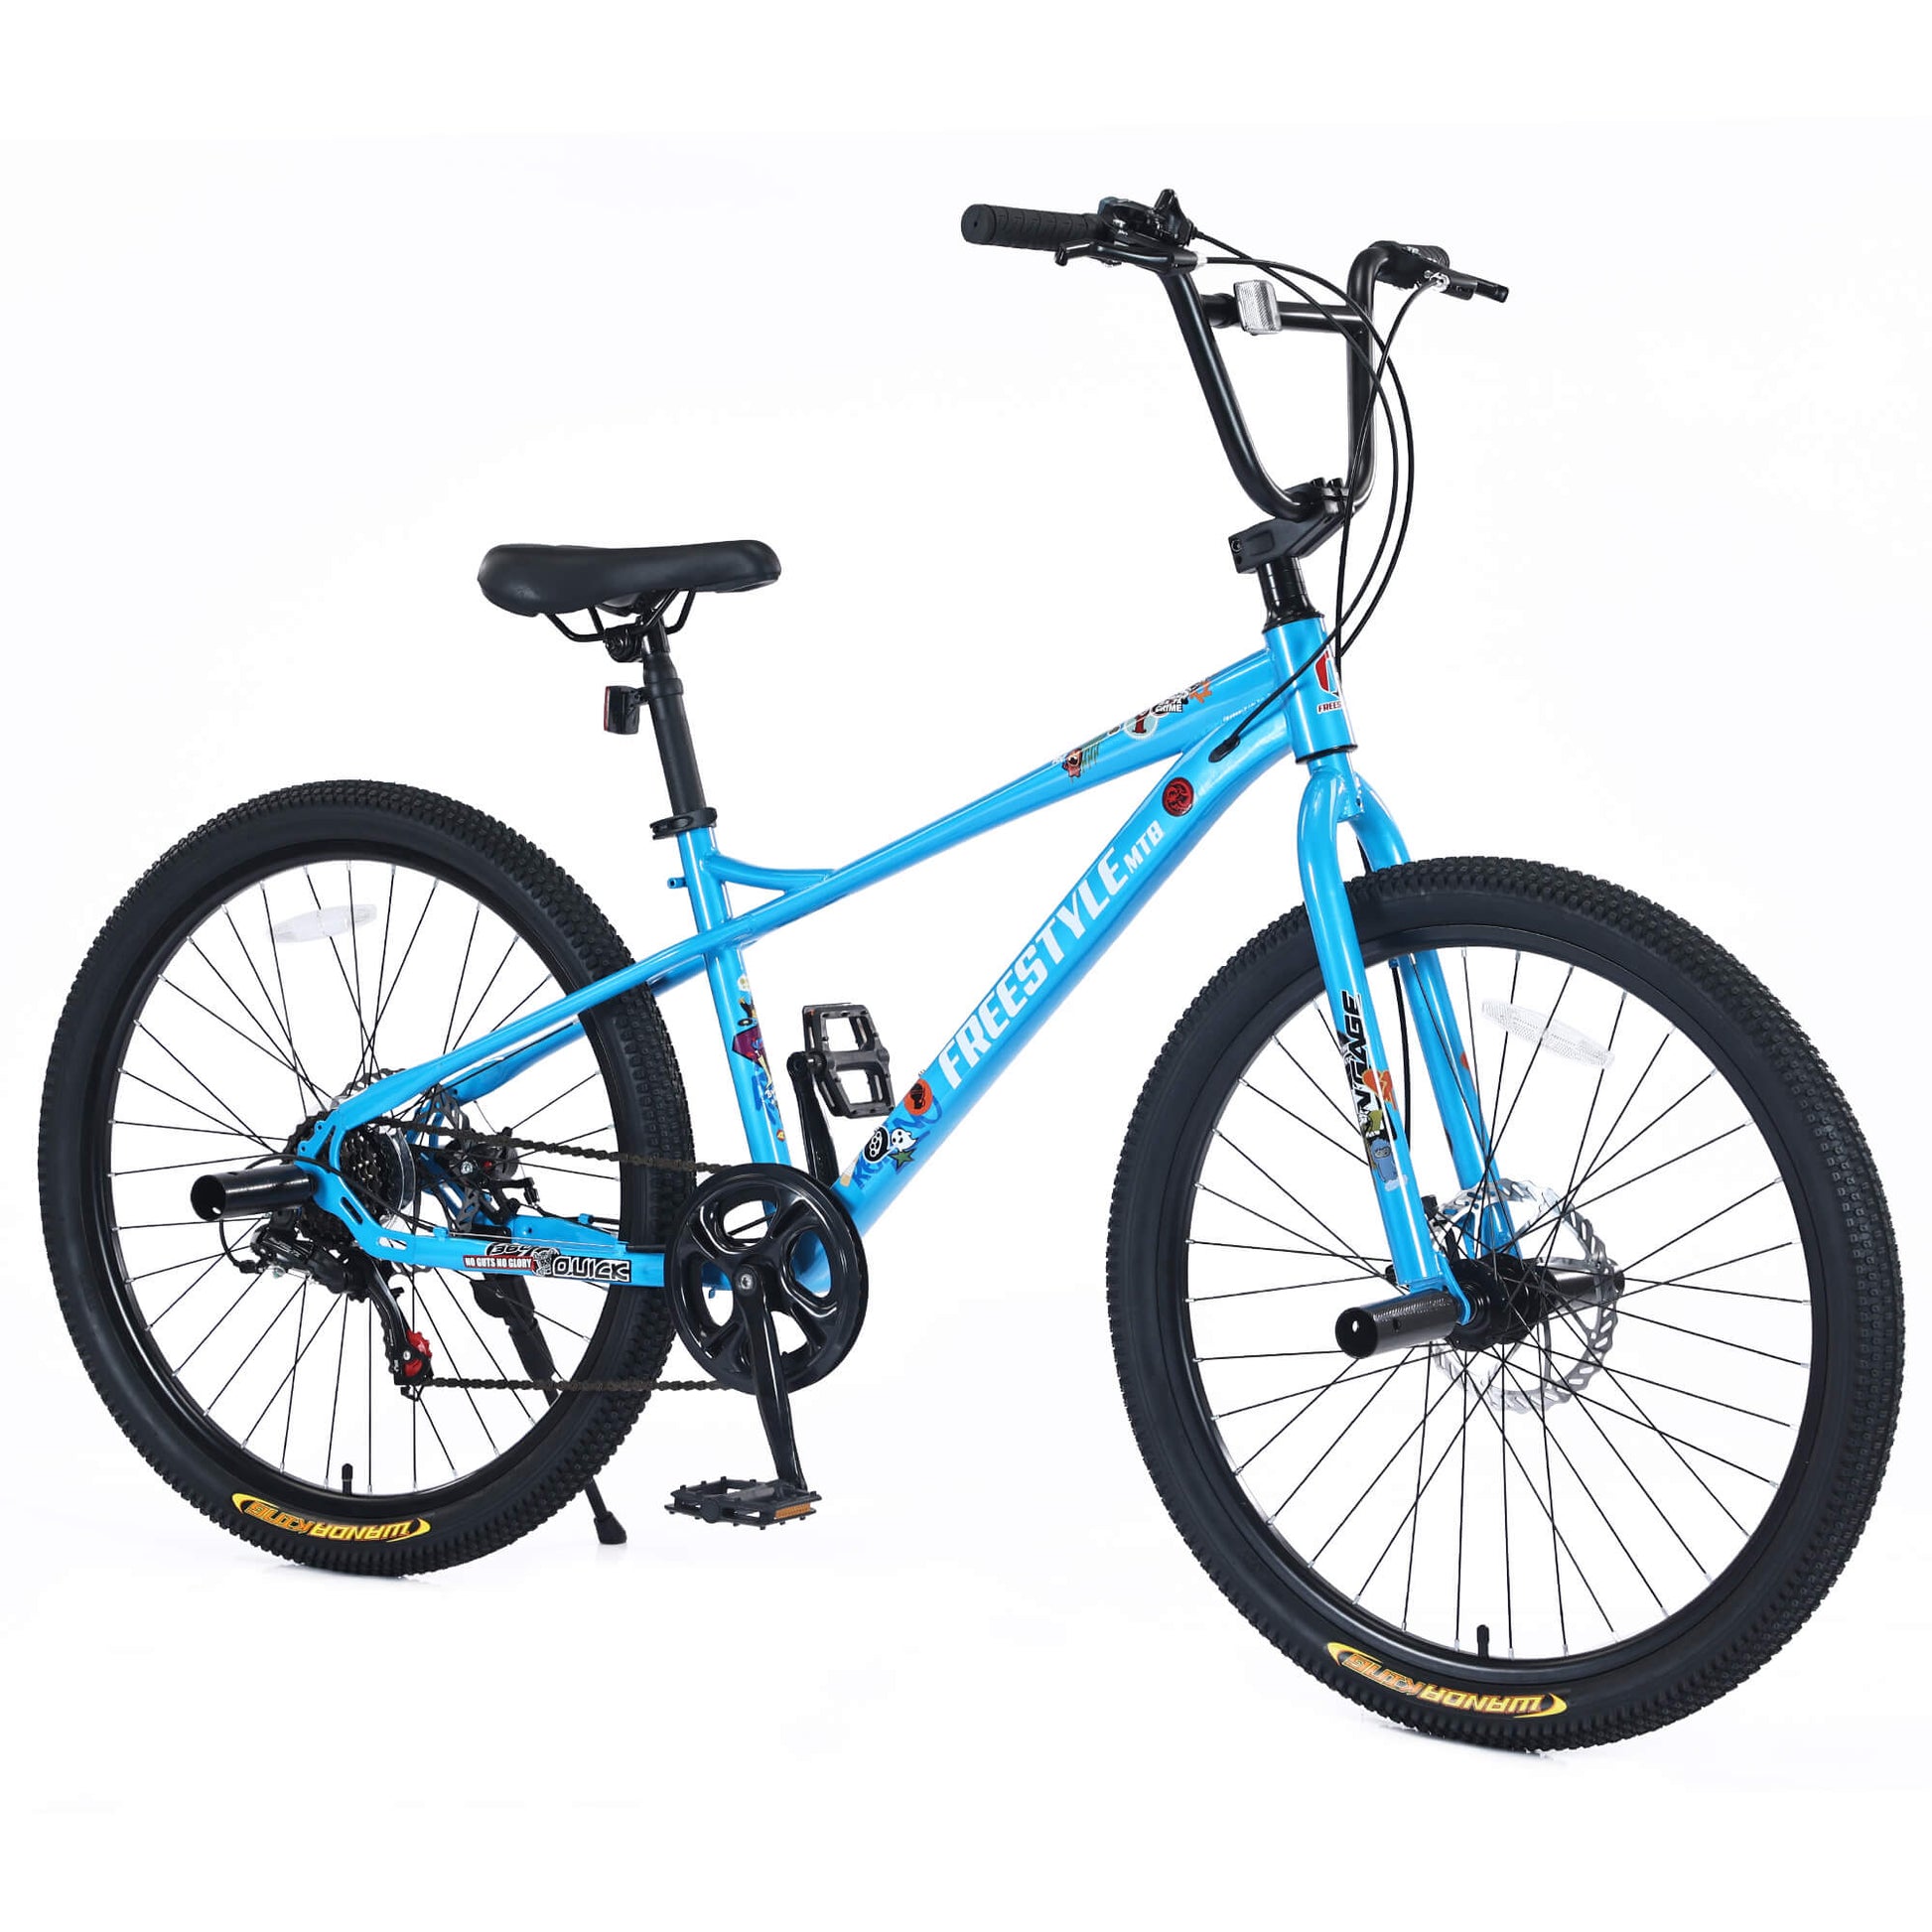 Rock-Rod 26"×2.35” Mountain Bike For Child/Youth - Hycline